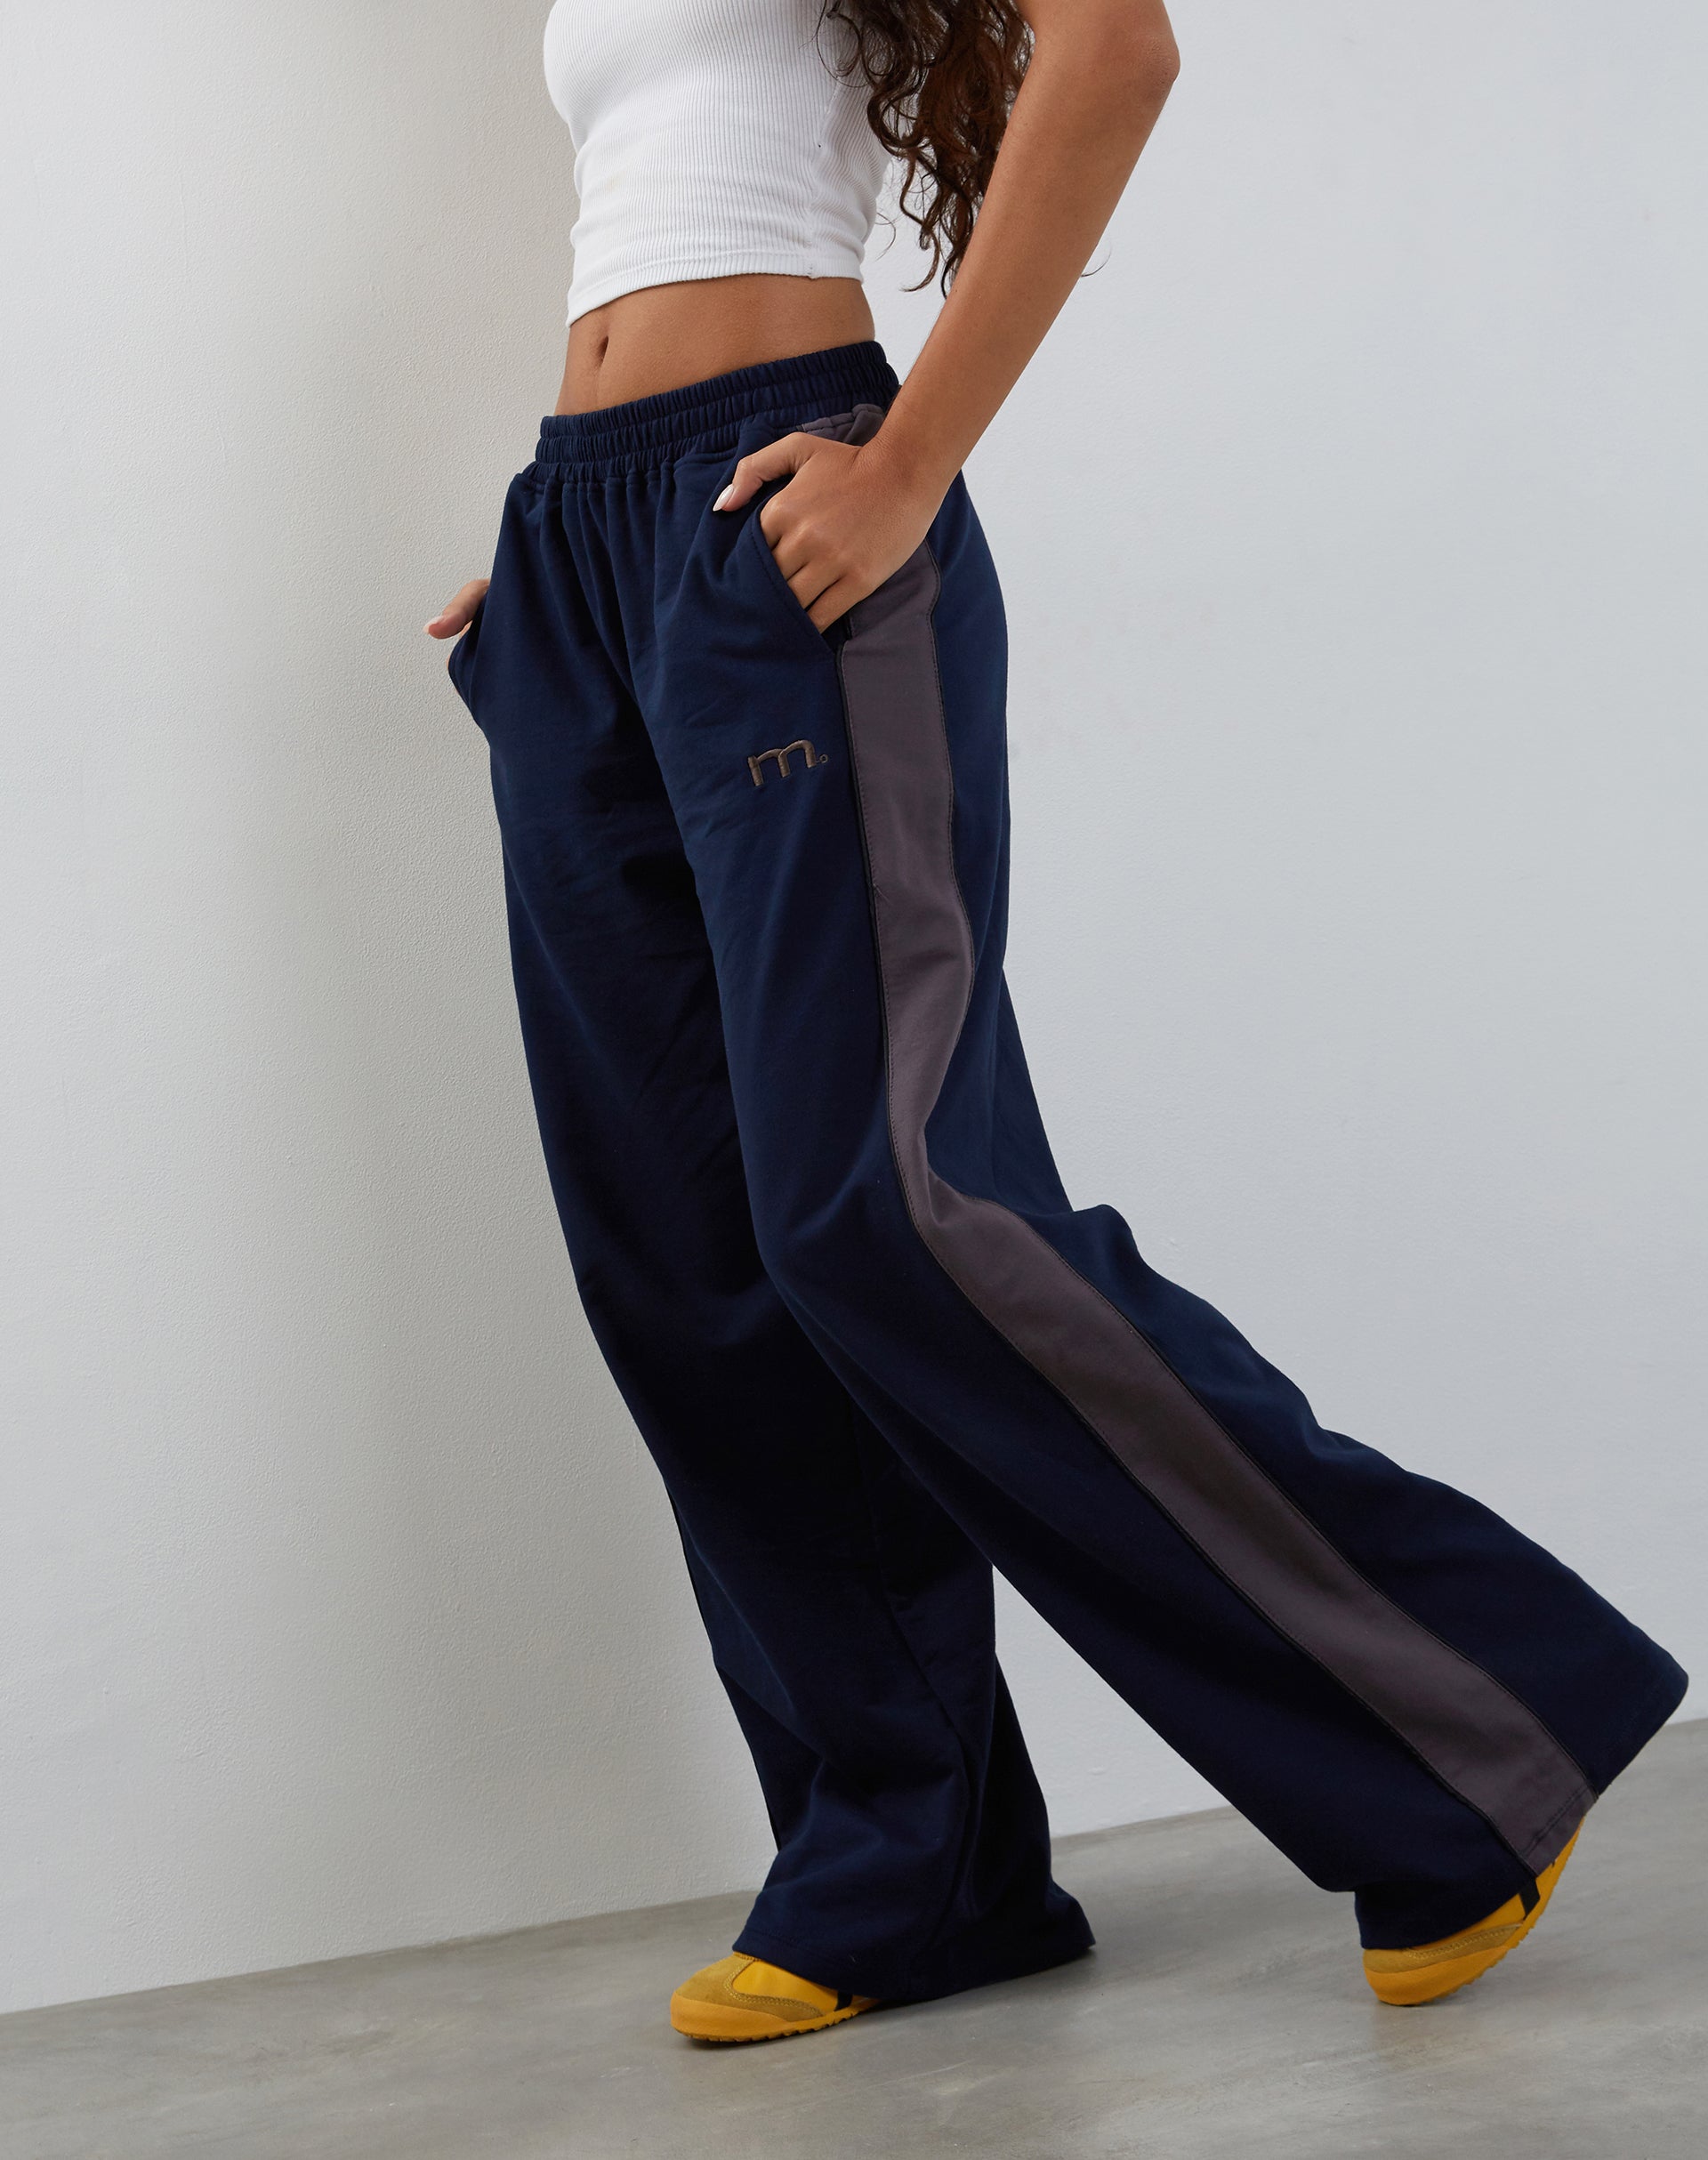 Image of Bedion Oversized Jogger in Navy with M Embroidery